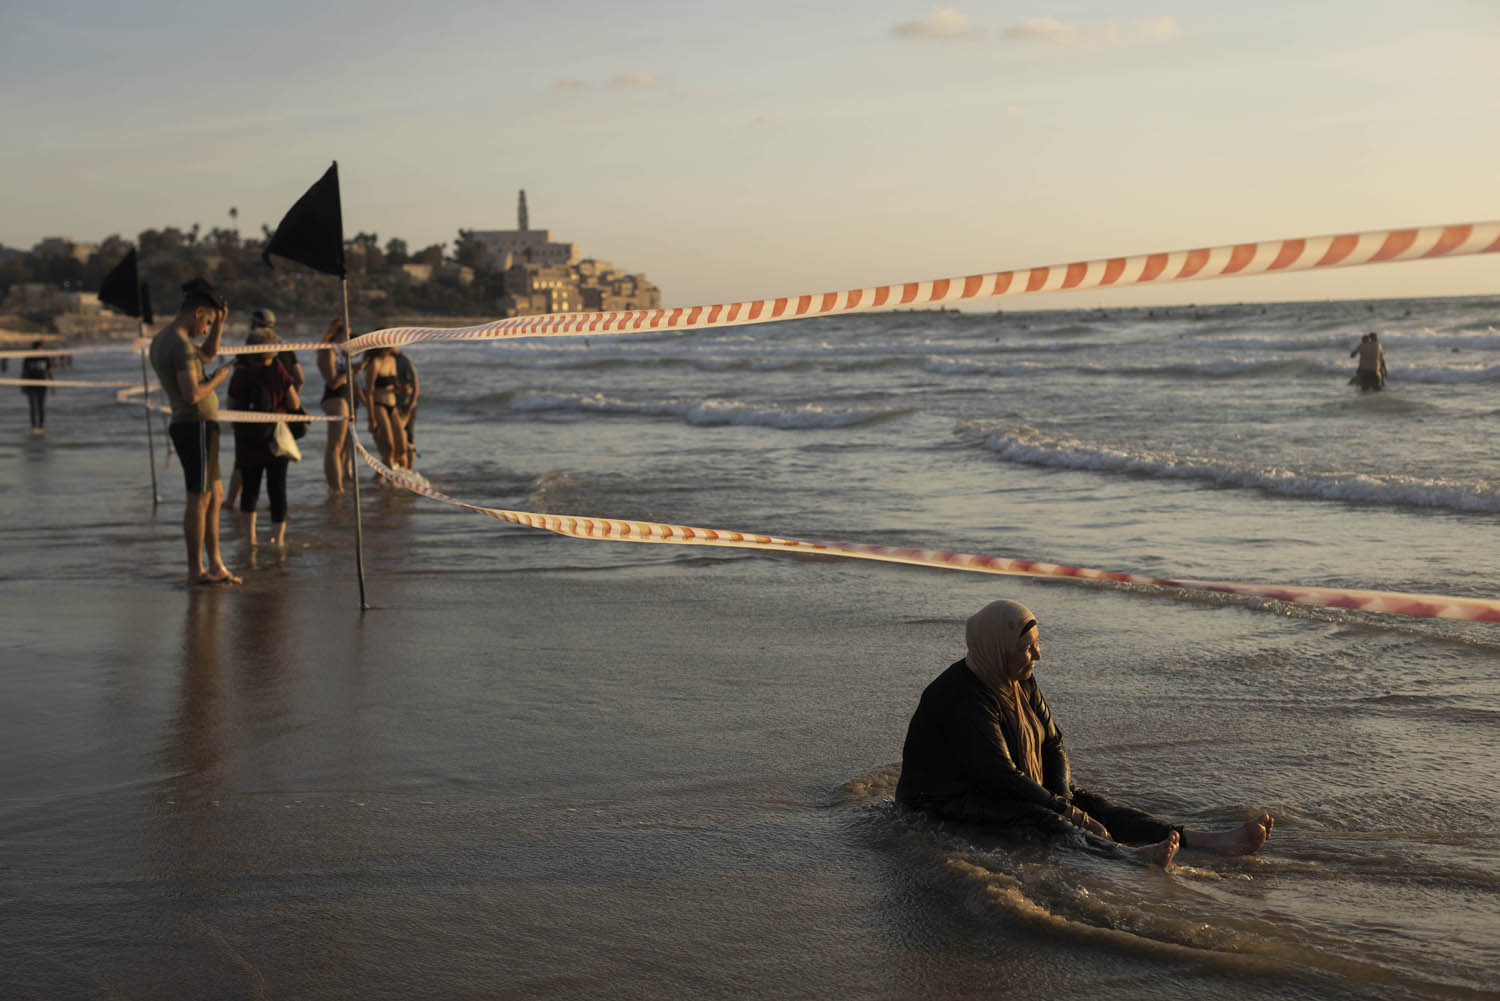 Palestinians from the West Bank enjoy the beach in Jaffa during the Eid al-Adha holiday, July 11, 2022. (Oren Ziv)